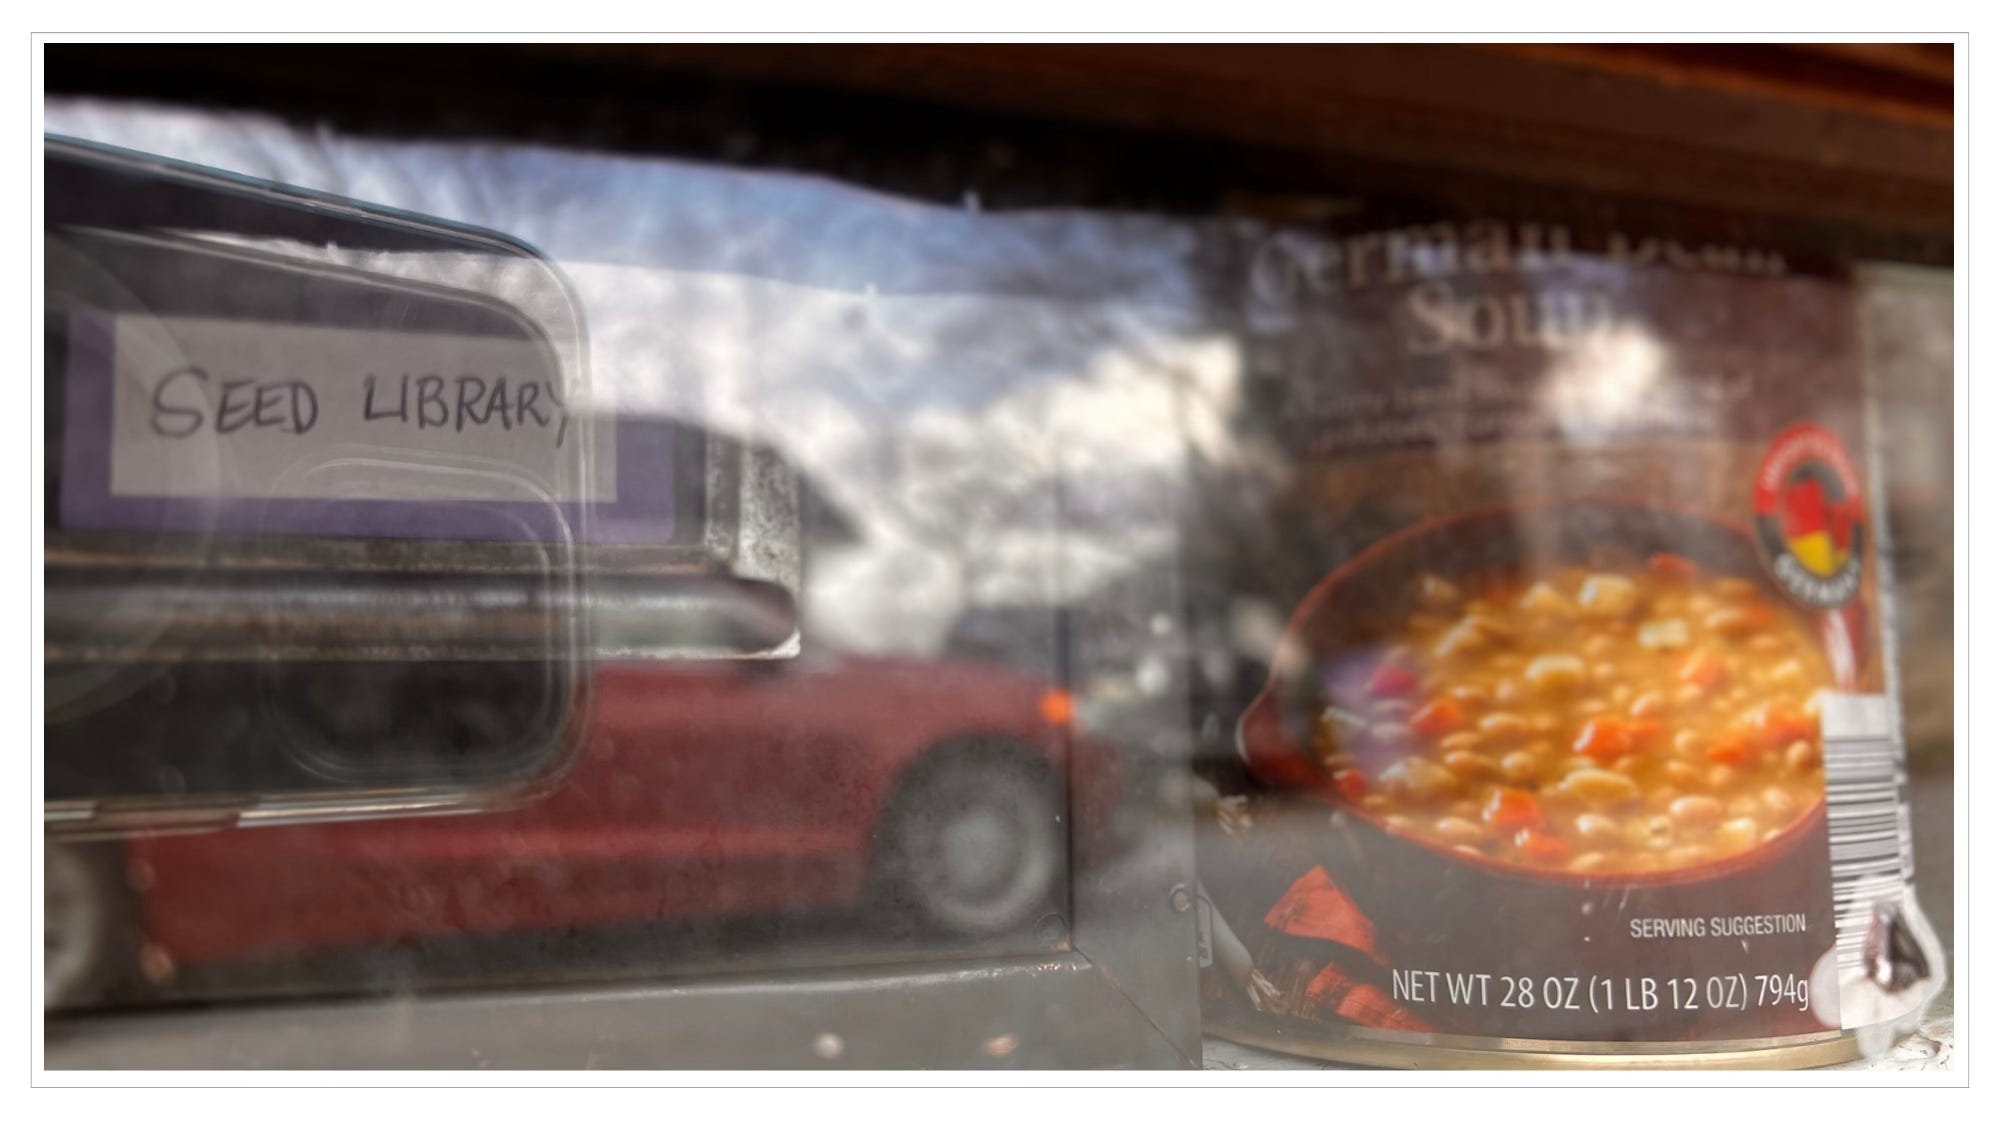 close-up of can of soup behind glass door, cell phon and car reflection